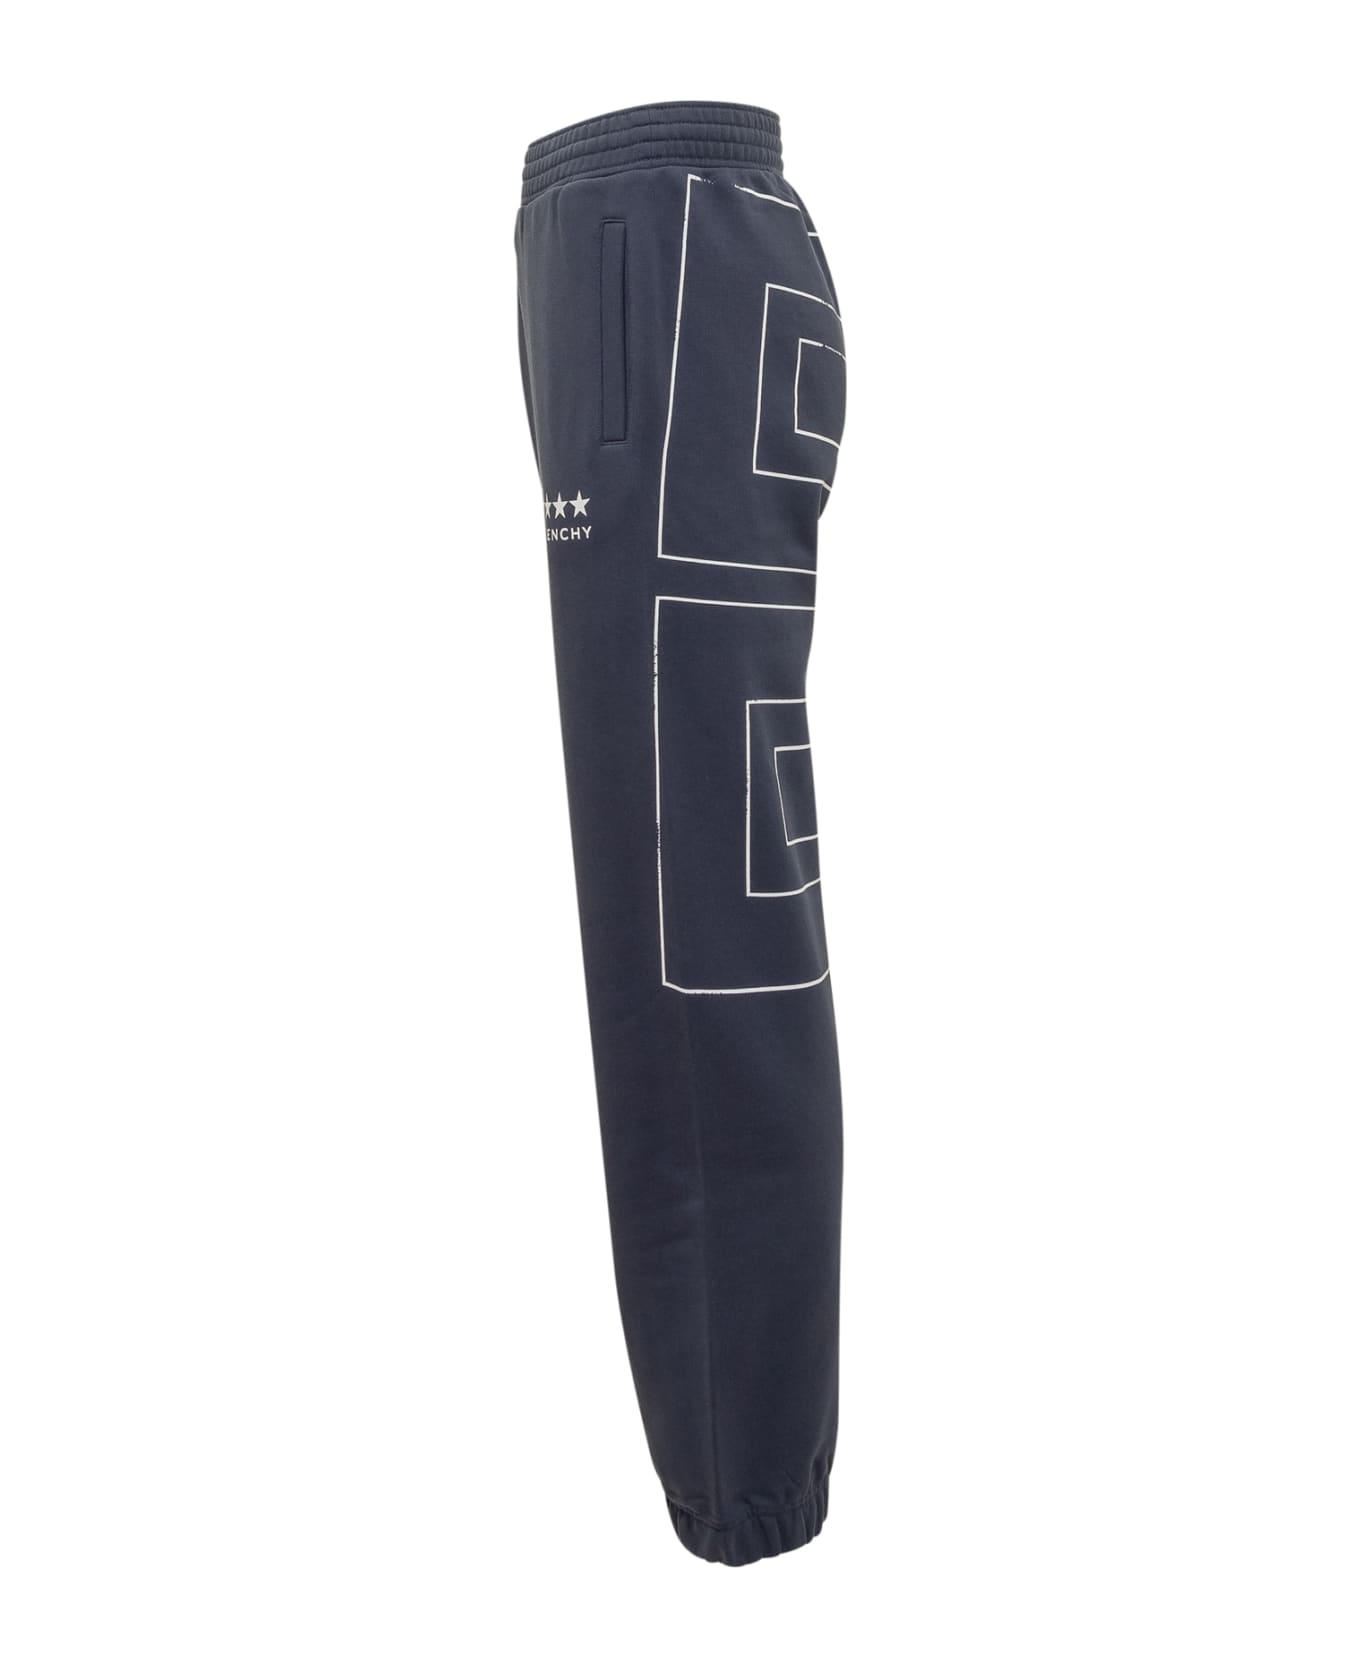 Givenchy Jogging Pants With 4g - DEEP BLUE スウェットパンツ